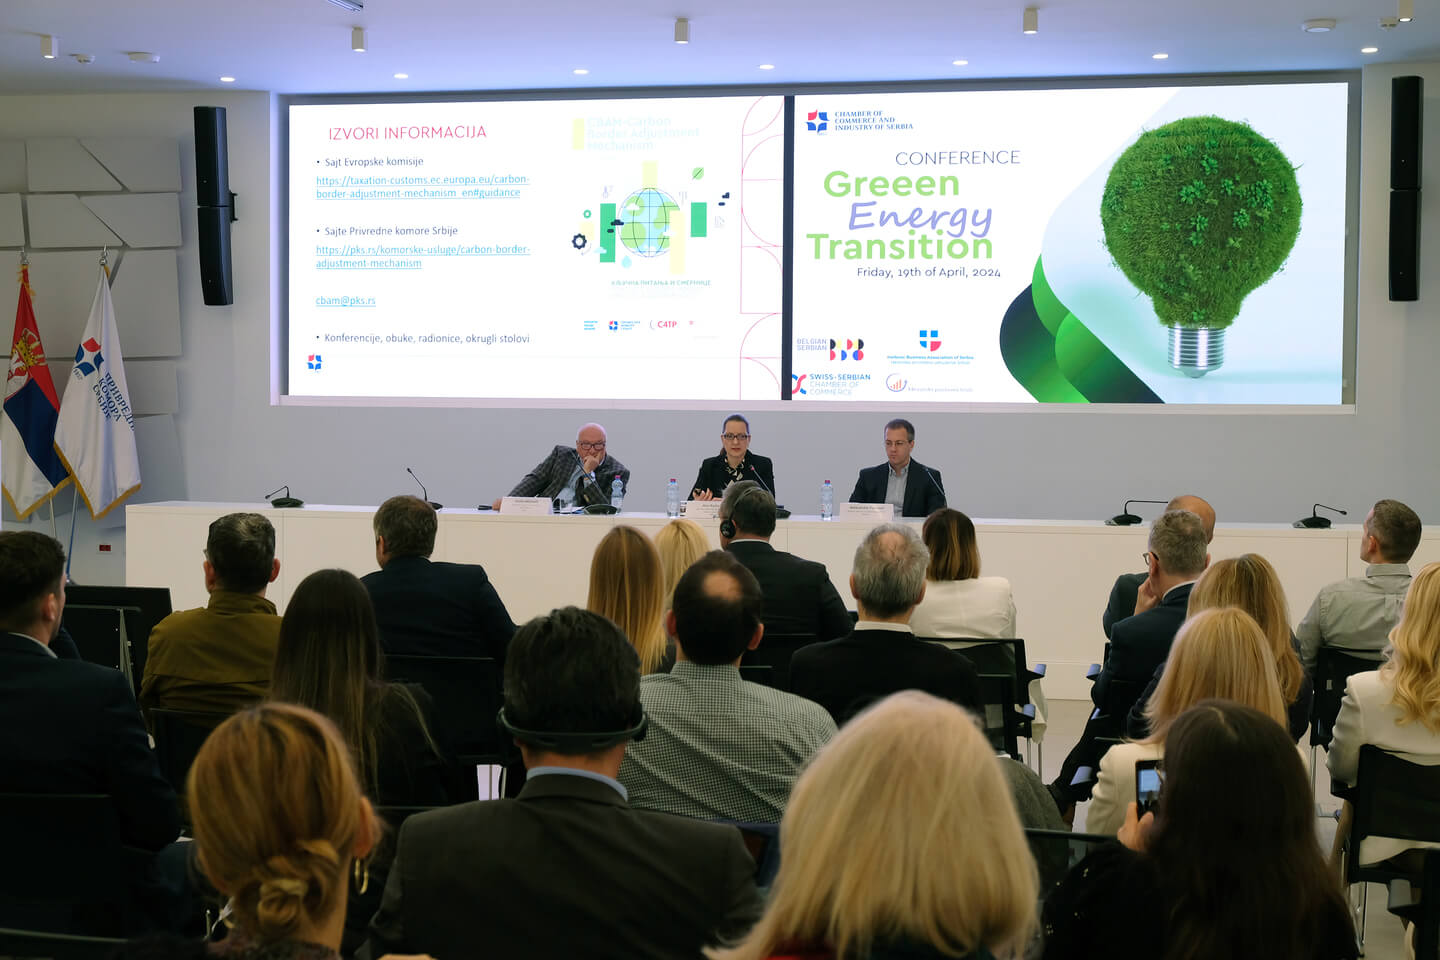 THE CONFERENCE “GREEN ENERGY TRANSITION”